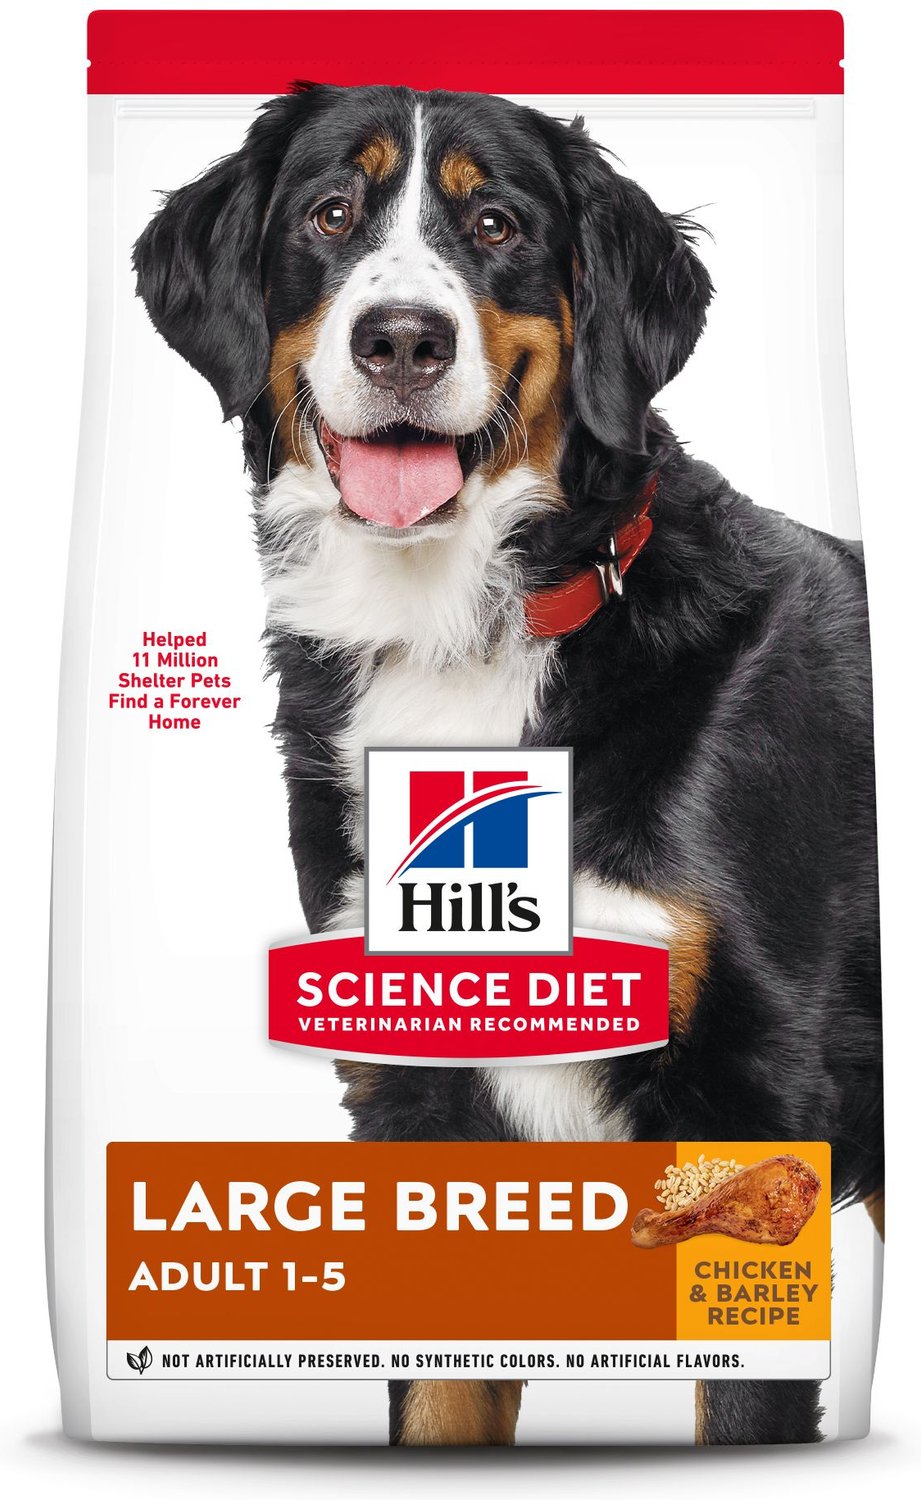 Hill's Science Diet Adult Large Breed Chicken & Barley Recipe Dry Dog Food